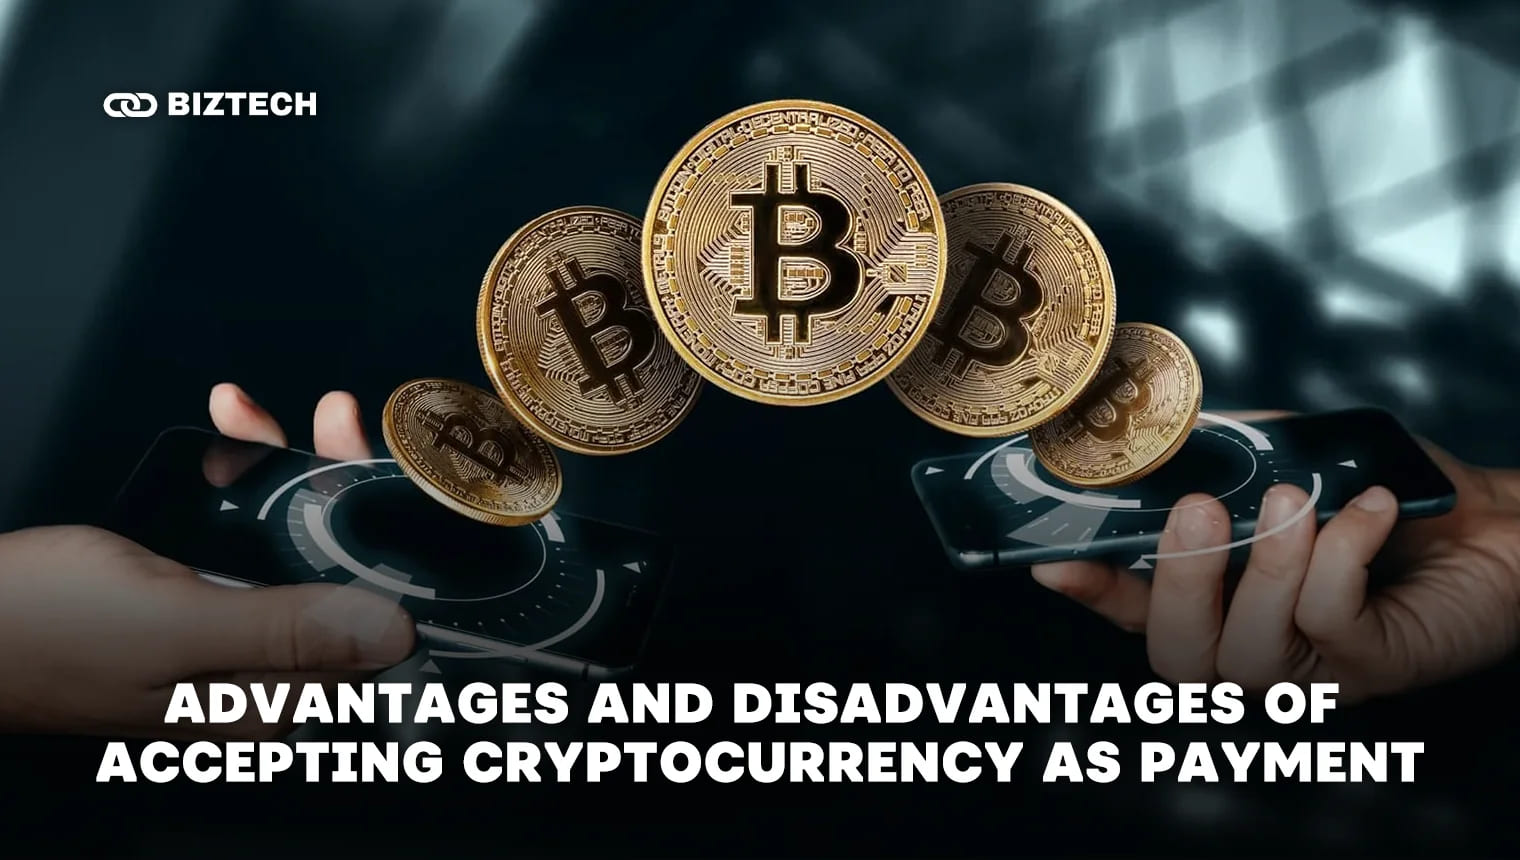 Advantages of Accepting Cryptocurrency as Payment